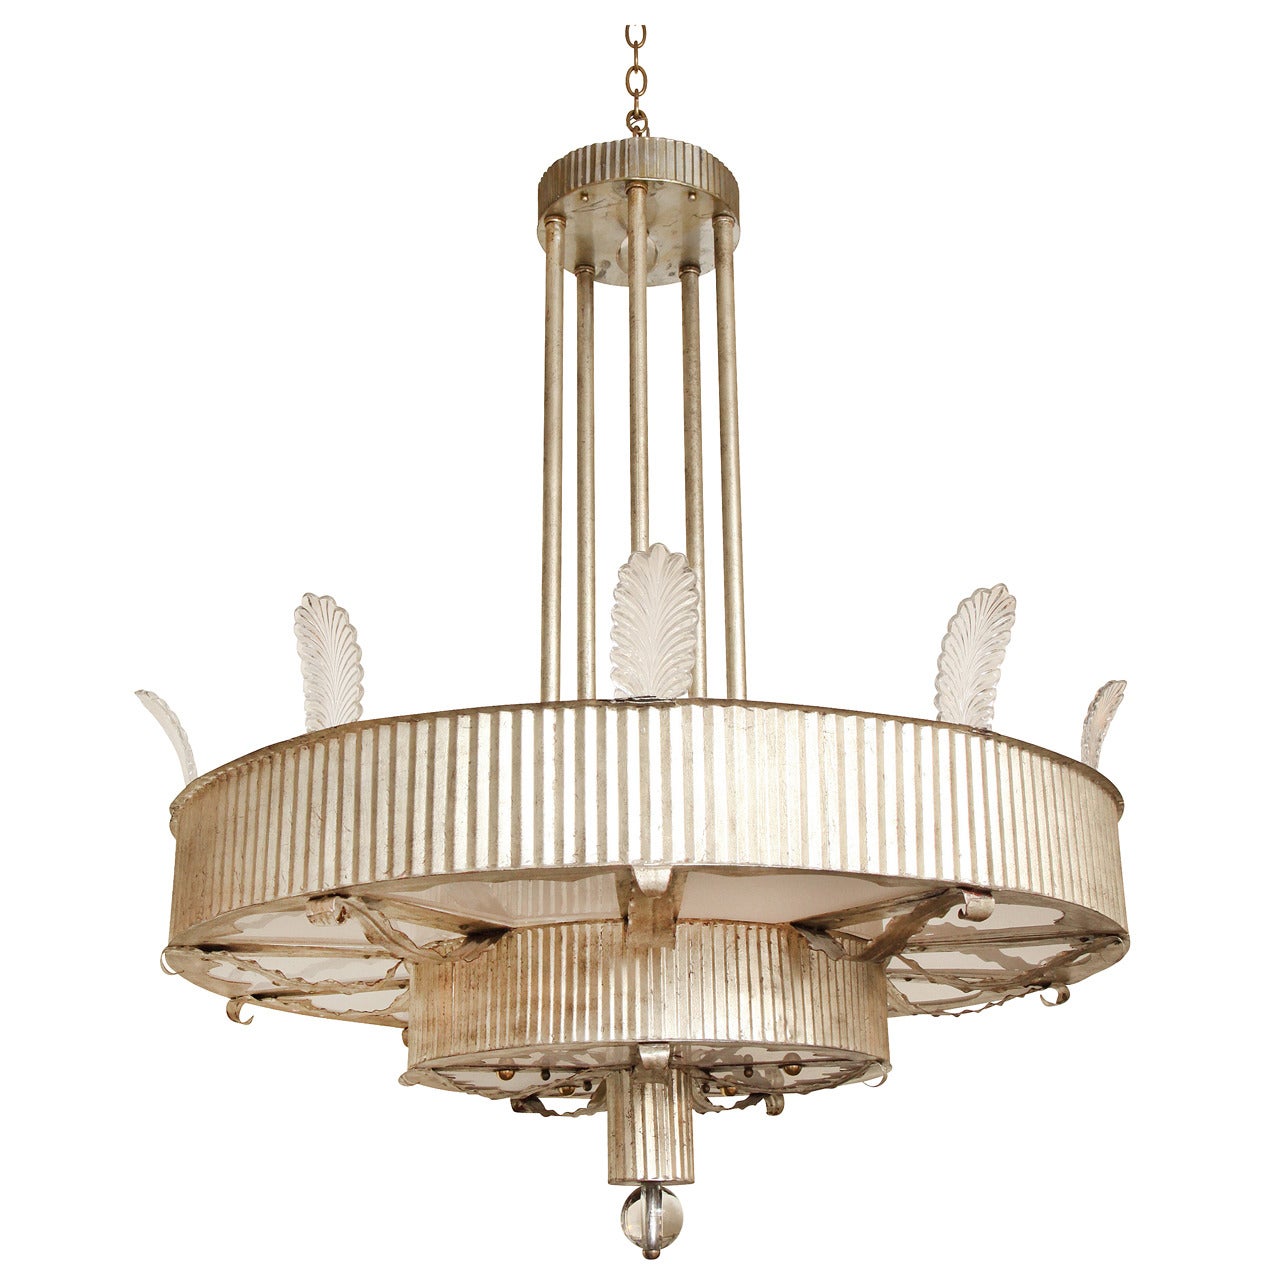 An Art Deco Inspired Three-Tiered Eltham Pendant Fixture by David Duncan